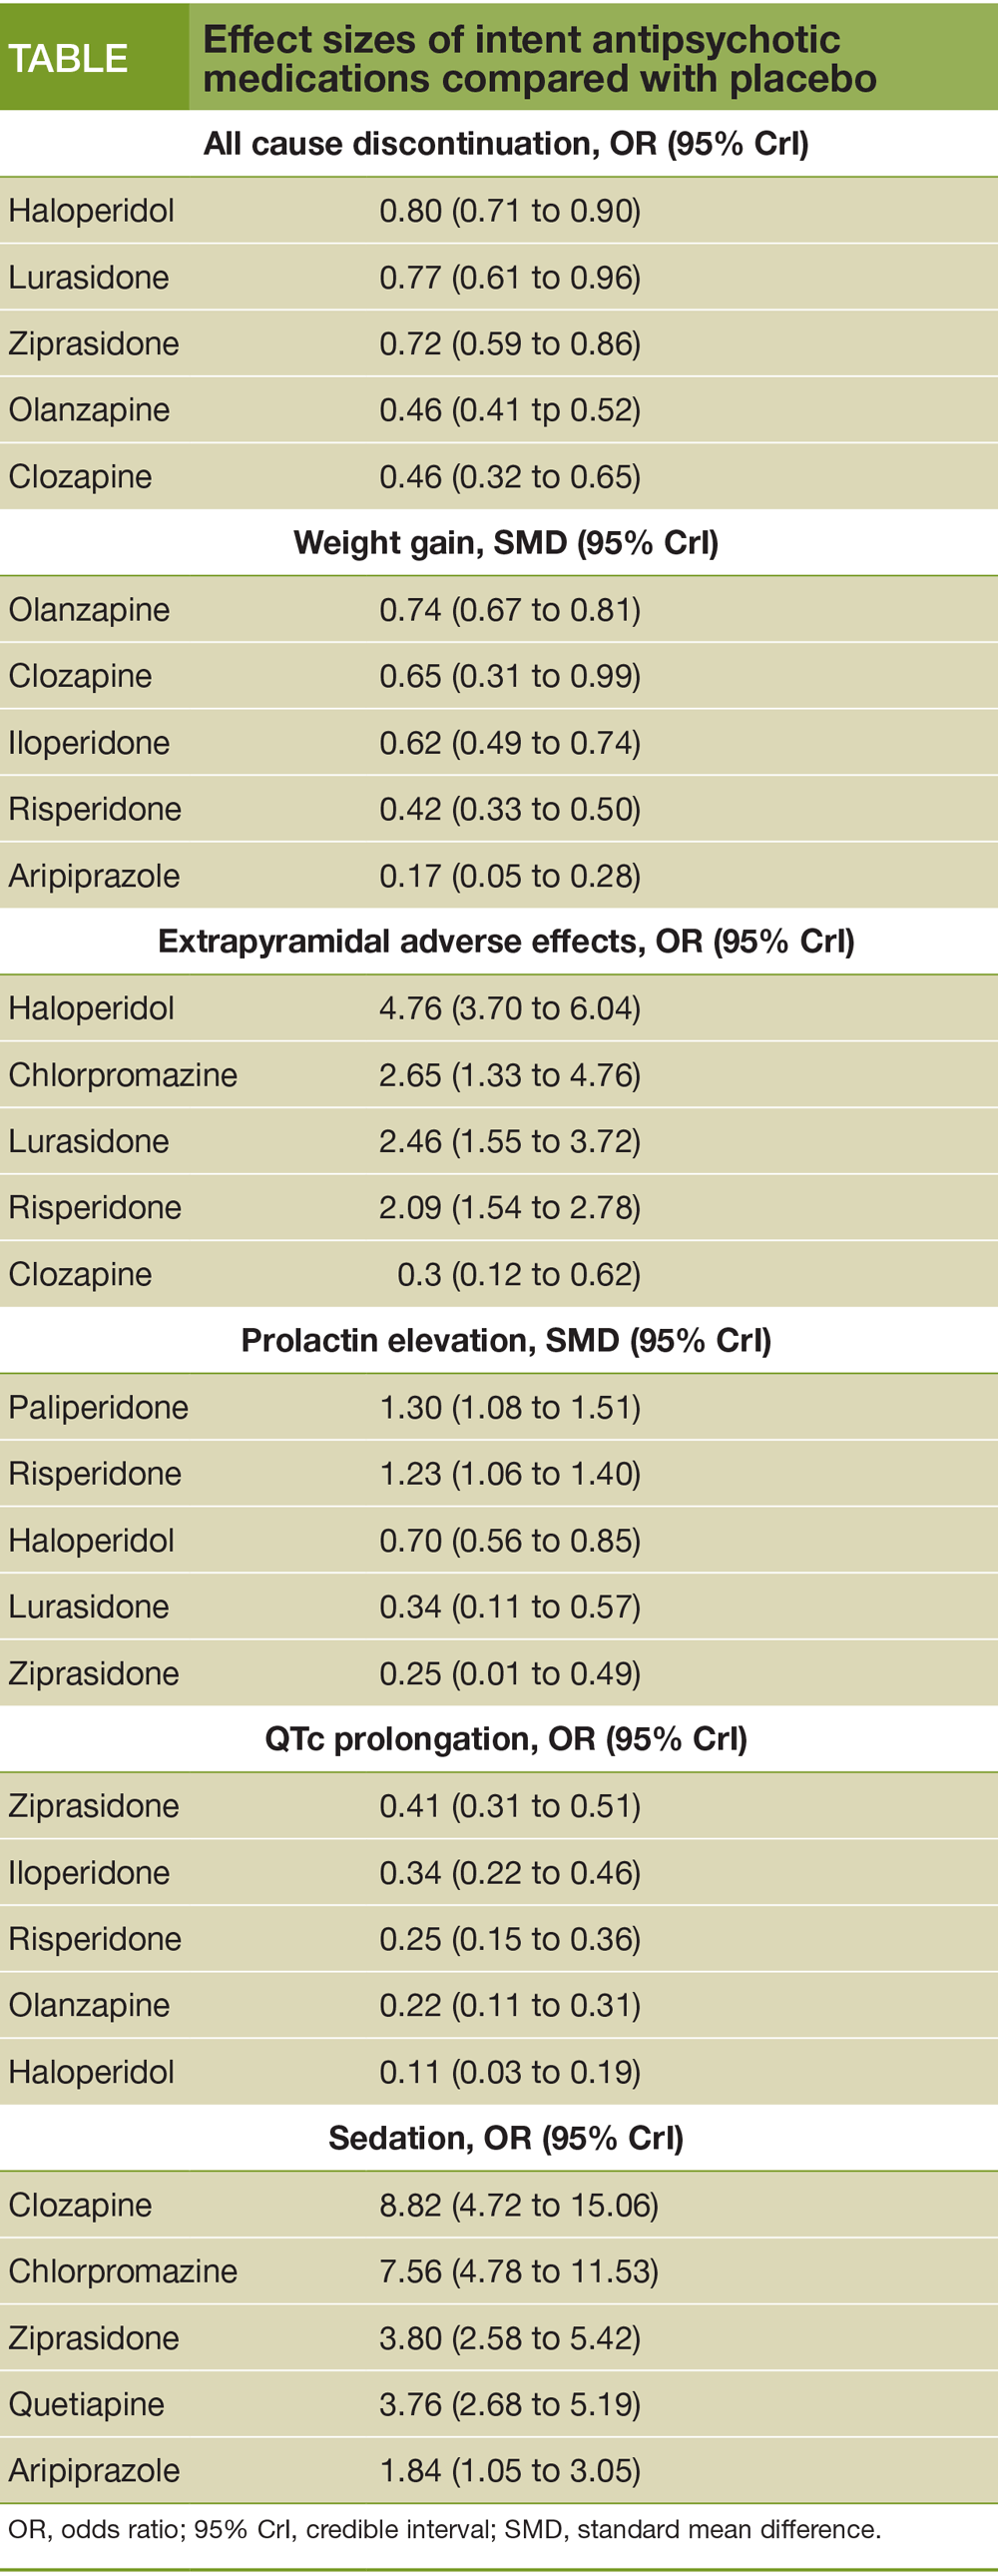 Effect sizes of intent antipsychotic medications compared with placebo